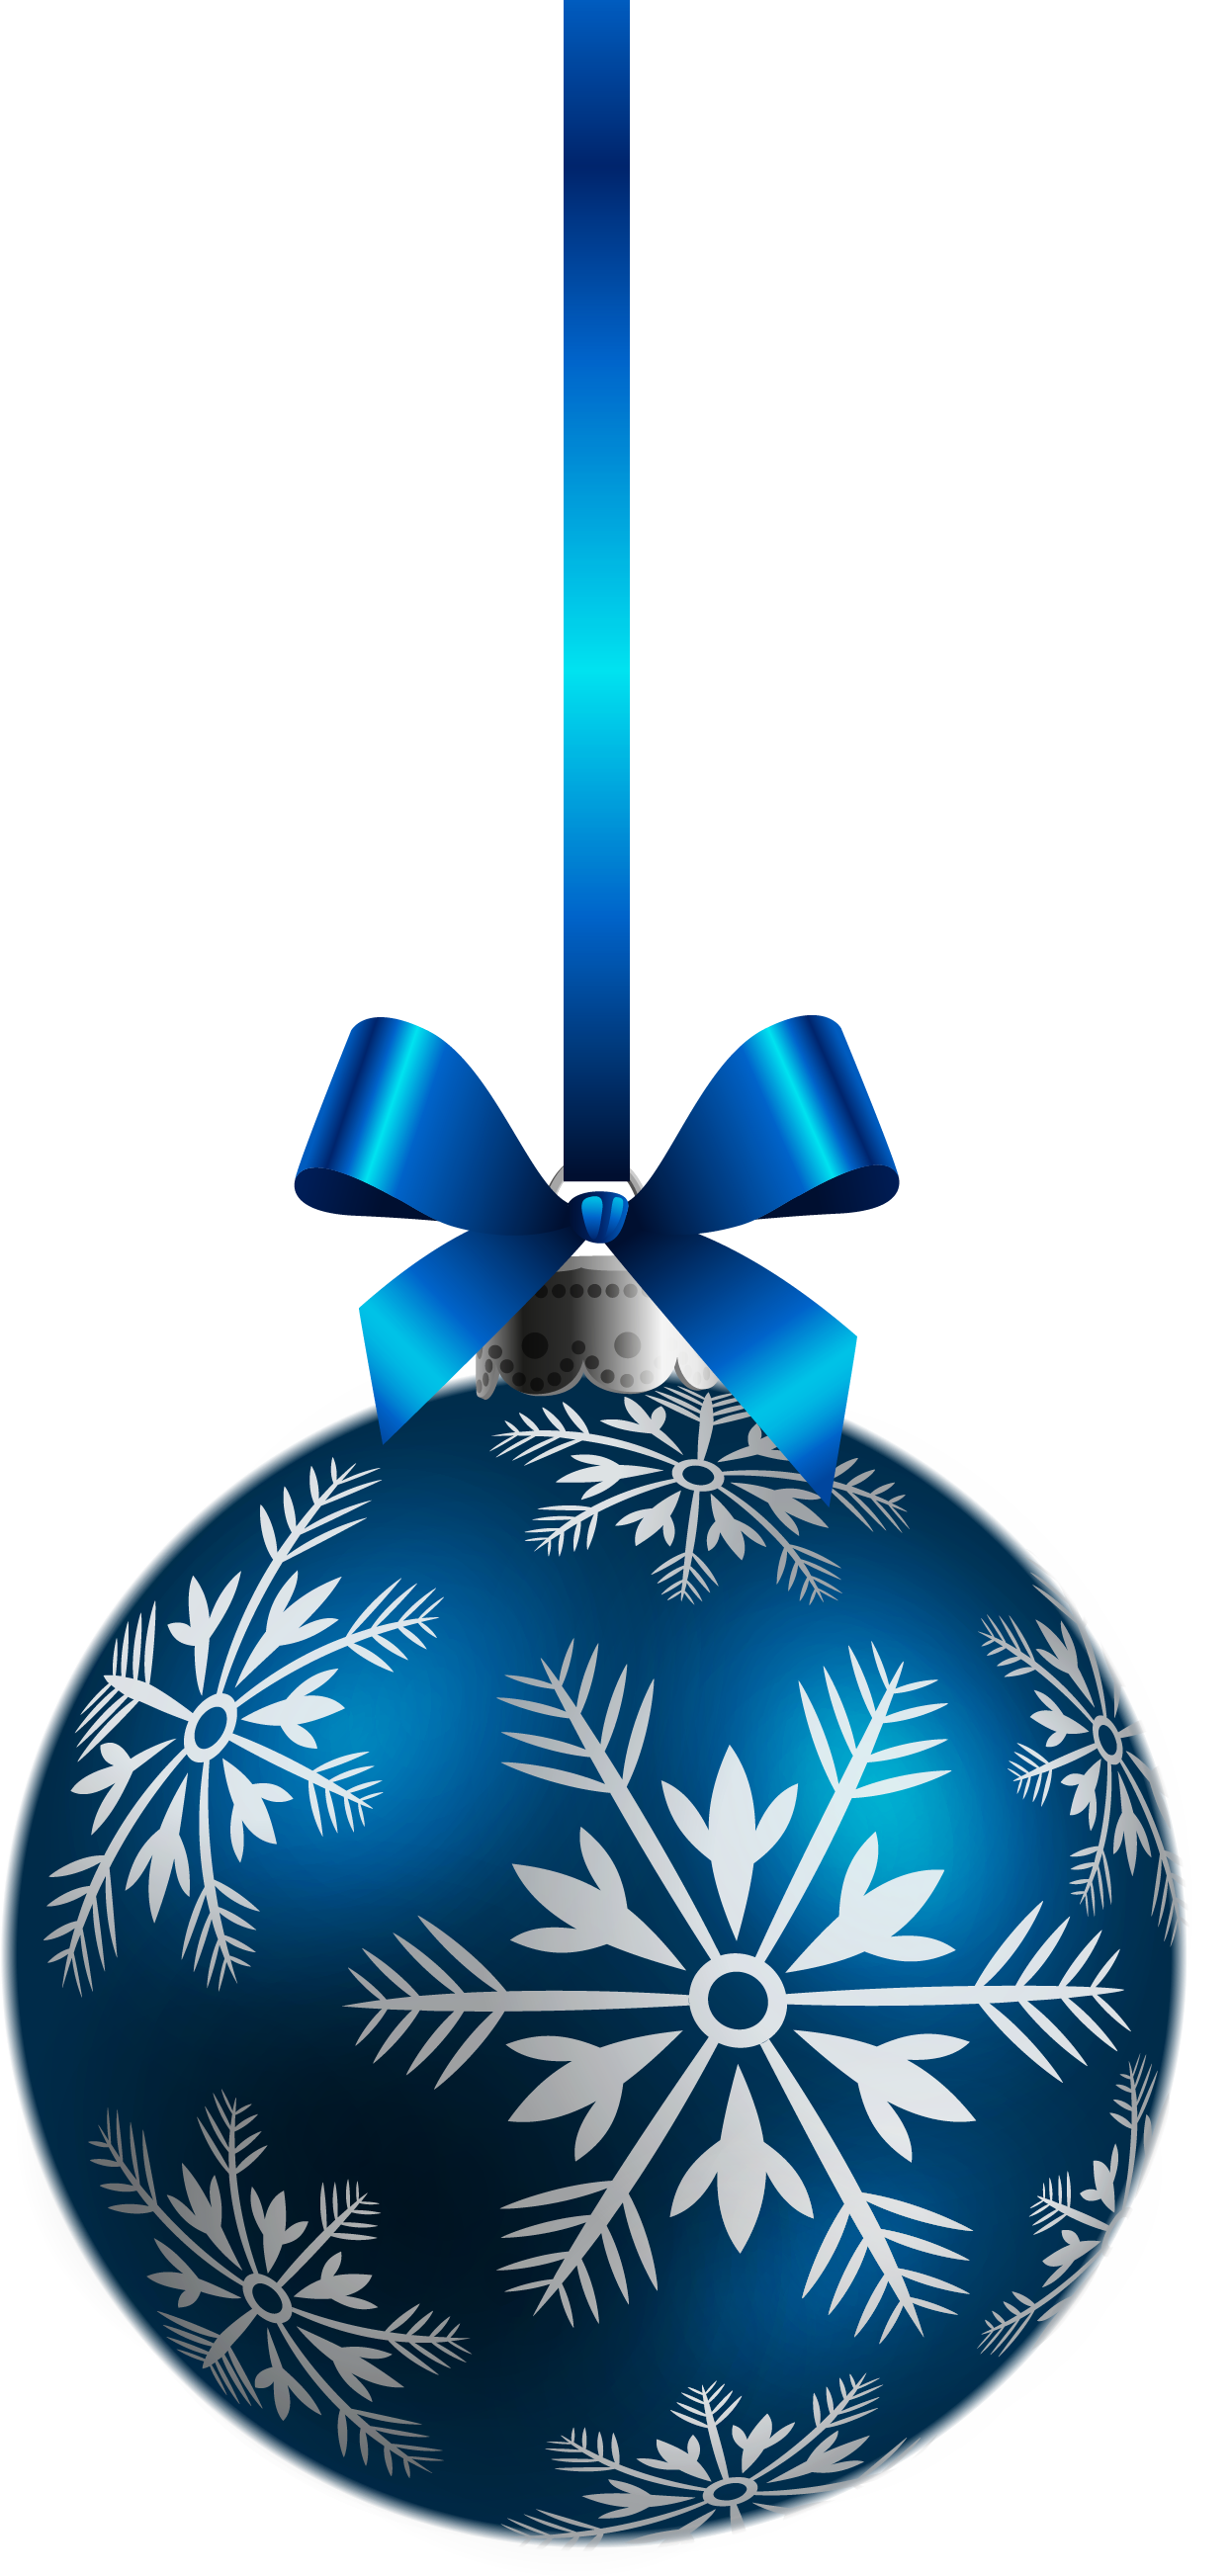 free holiday ornament clipart - photo #49